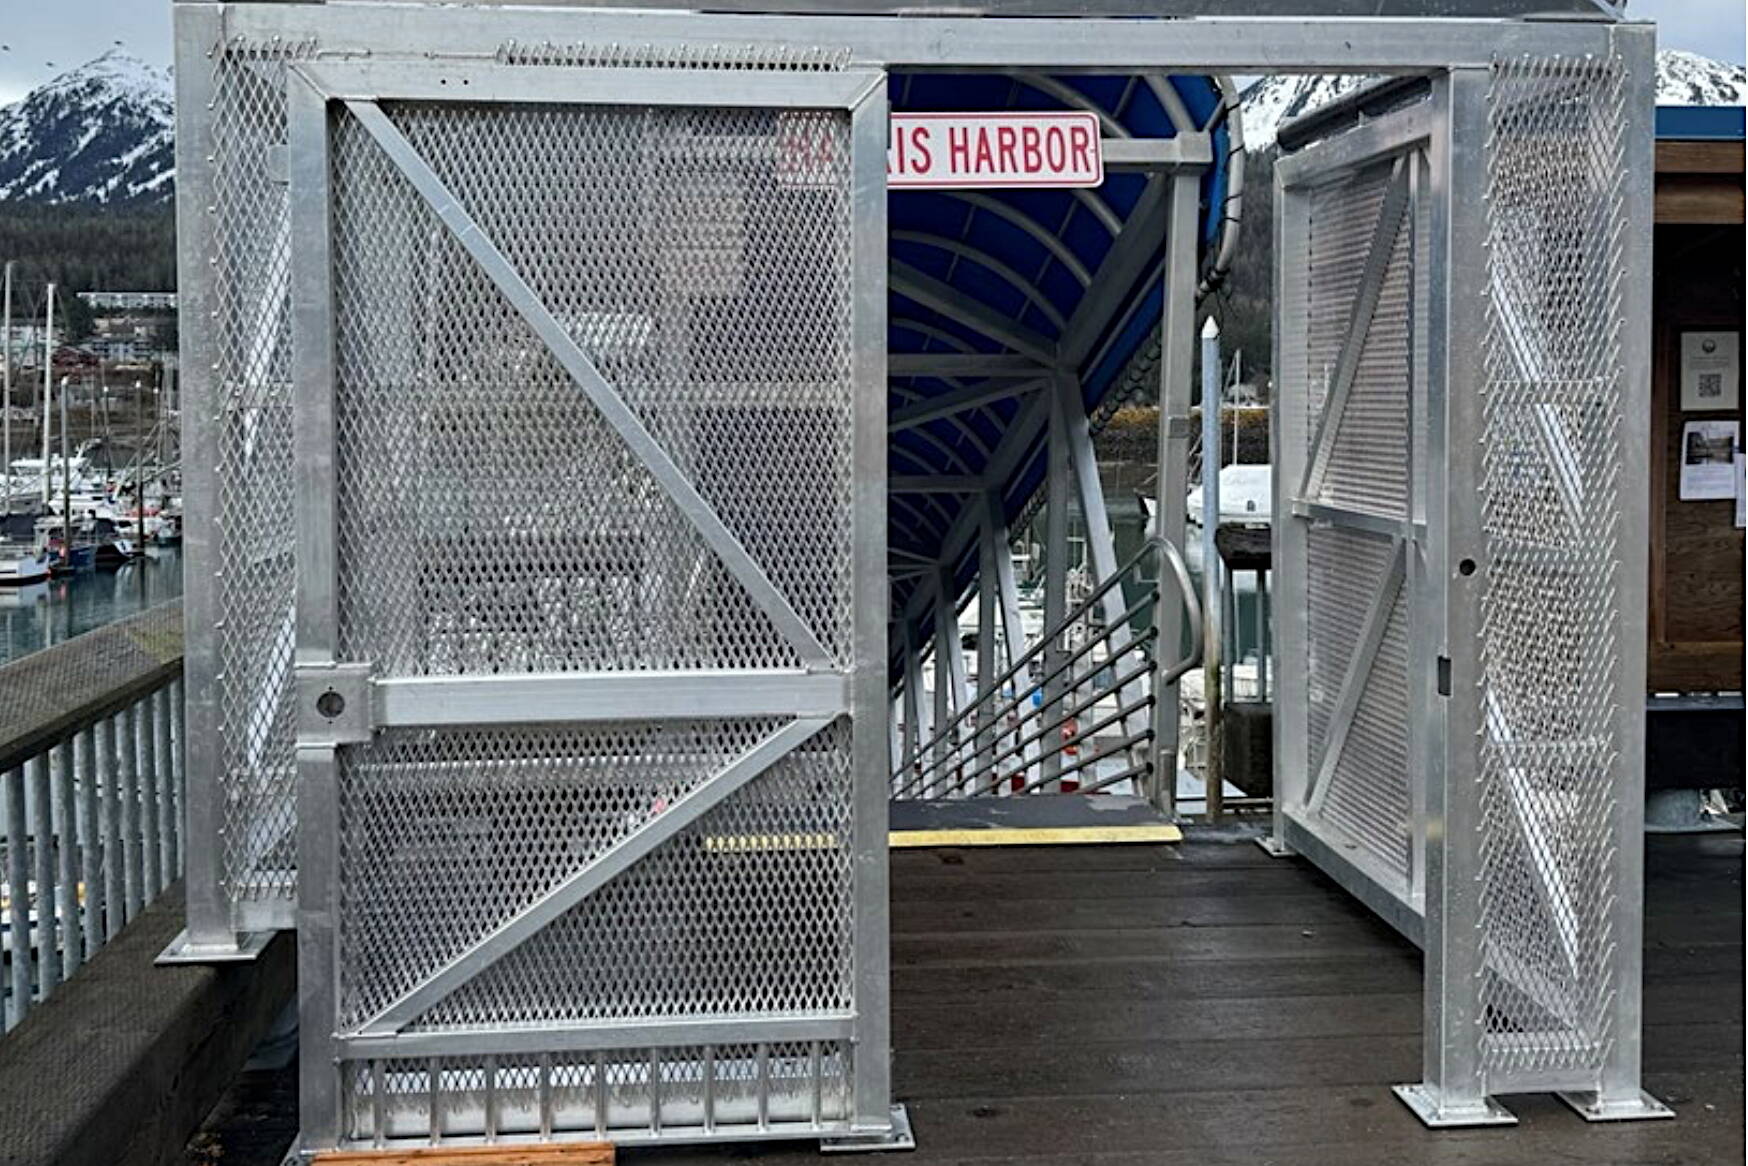 A security gate installed at Harris Harbor is scheduled to be locked from 10 p.m. to 5 a.m. daily starting in early May, with access to boaters provided by key fobs or other means. (City and Borough of Juneau photo)